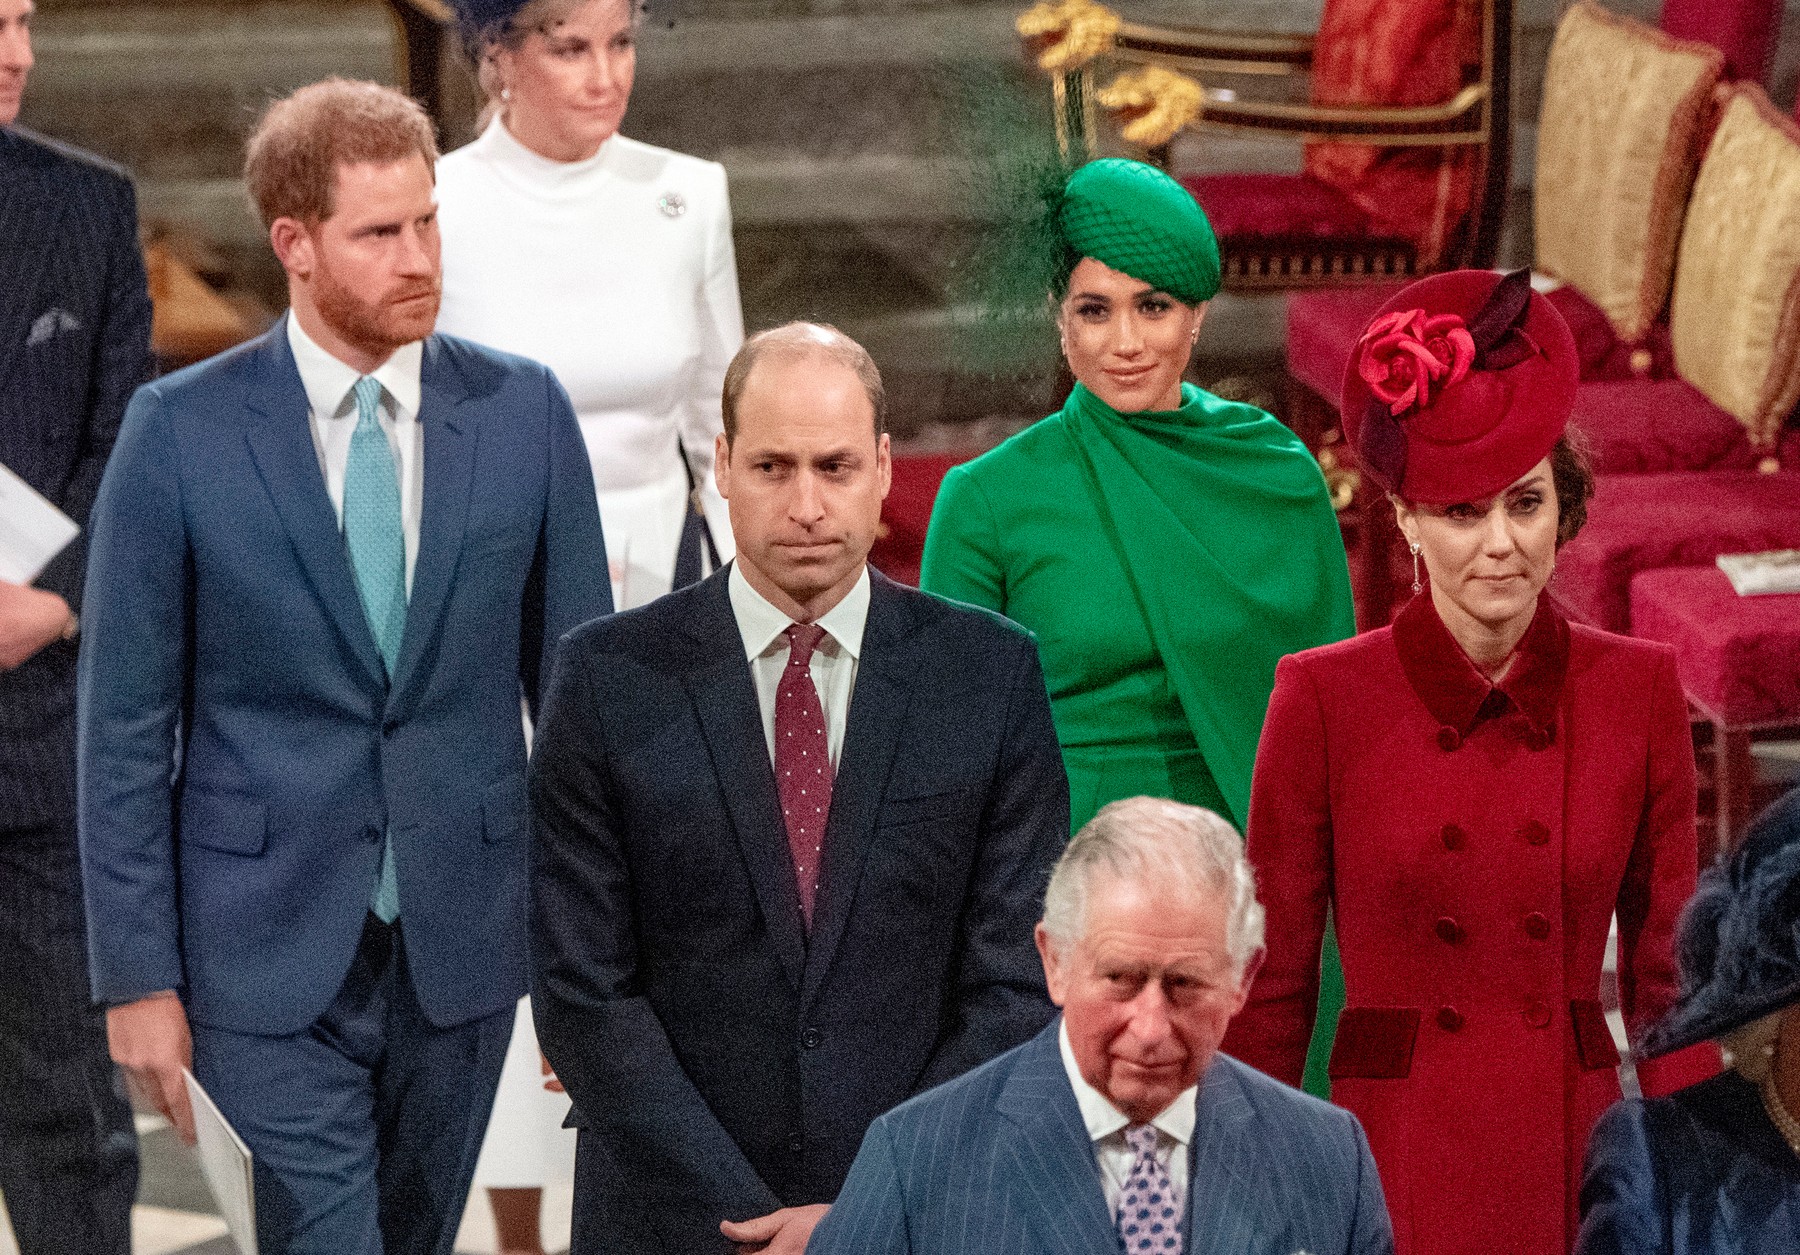 Queen Elizabeth II , Prince of Wales, Duchess of Cornwall , Prince Harry and Meghan Markle, the Duke and Duchess of Sussex, along with Duke and Duchess of Cambridge and Earl and Countess of Wessex at the Commonwealth Day Service at Westminster Abbey  in London. Picture by i-Images / Pool, Image: 505043772, License: Rights-managed, Restrictions: UK OUT.  End users shall not licence, sell, transmit, or otherwise distribute any photographs represented by eyevine, to any third party. Contact eyevine for more information: Tel: +44 (0) 20 8709 8709 Email: info@eyevine.com, Model Release: no, Credit line: i-Images / Eyevine / Profimedia